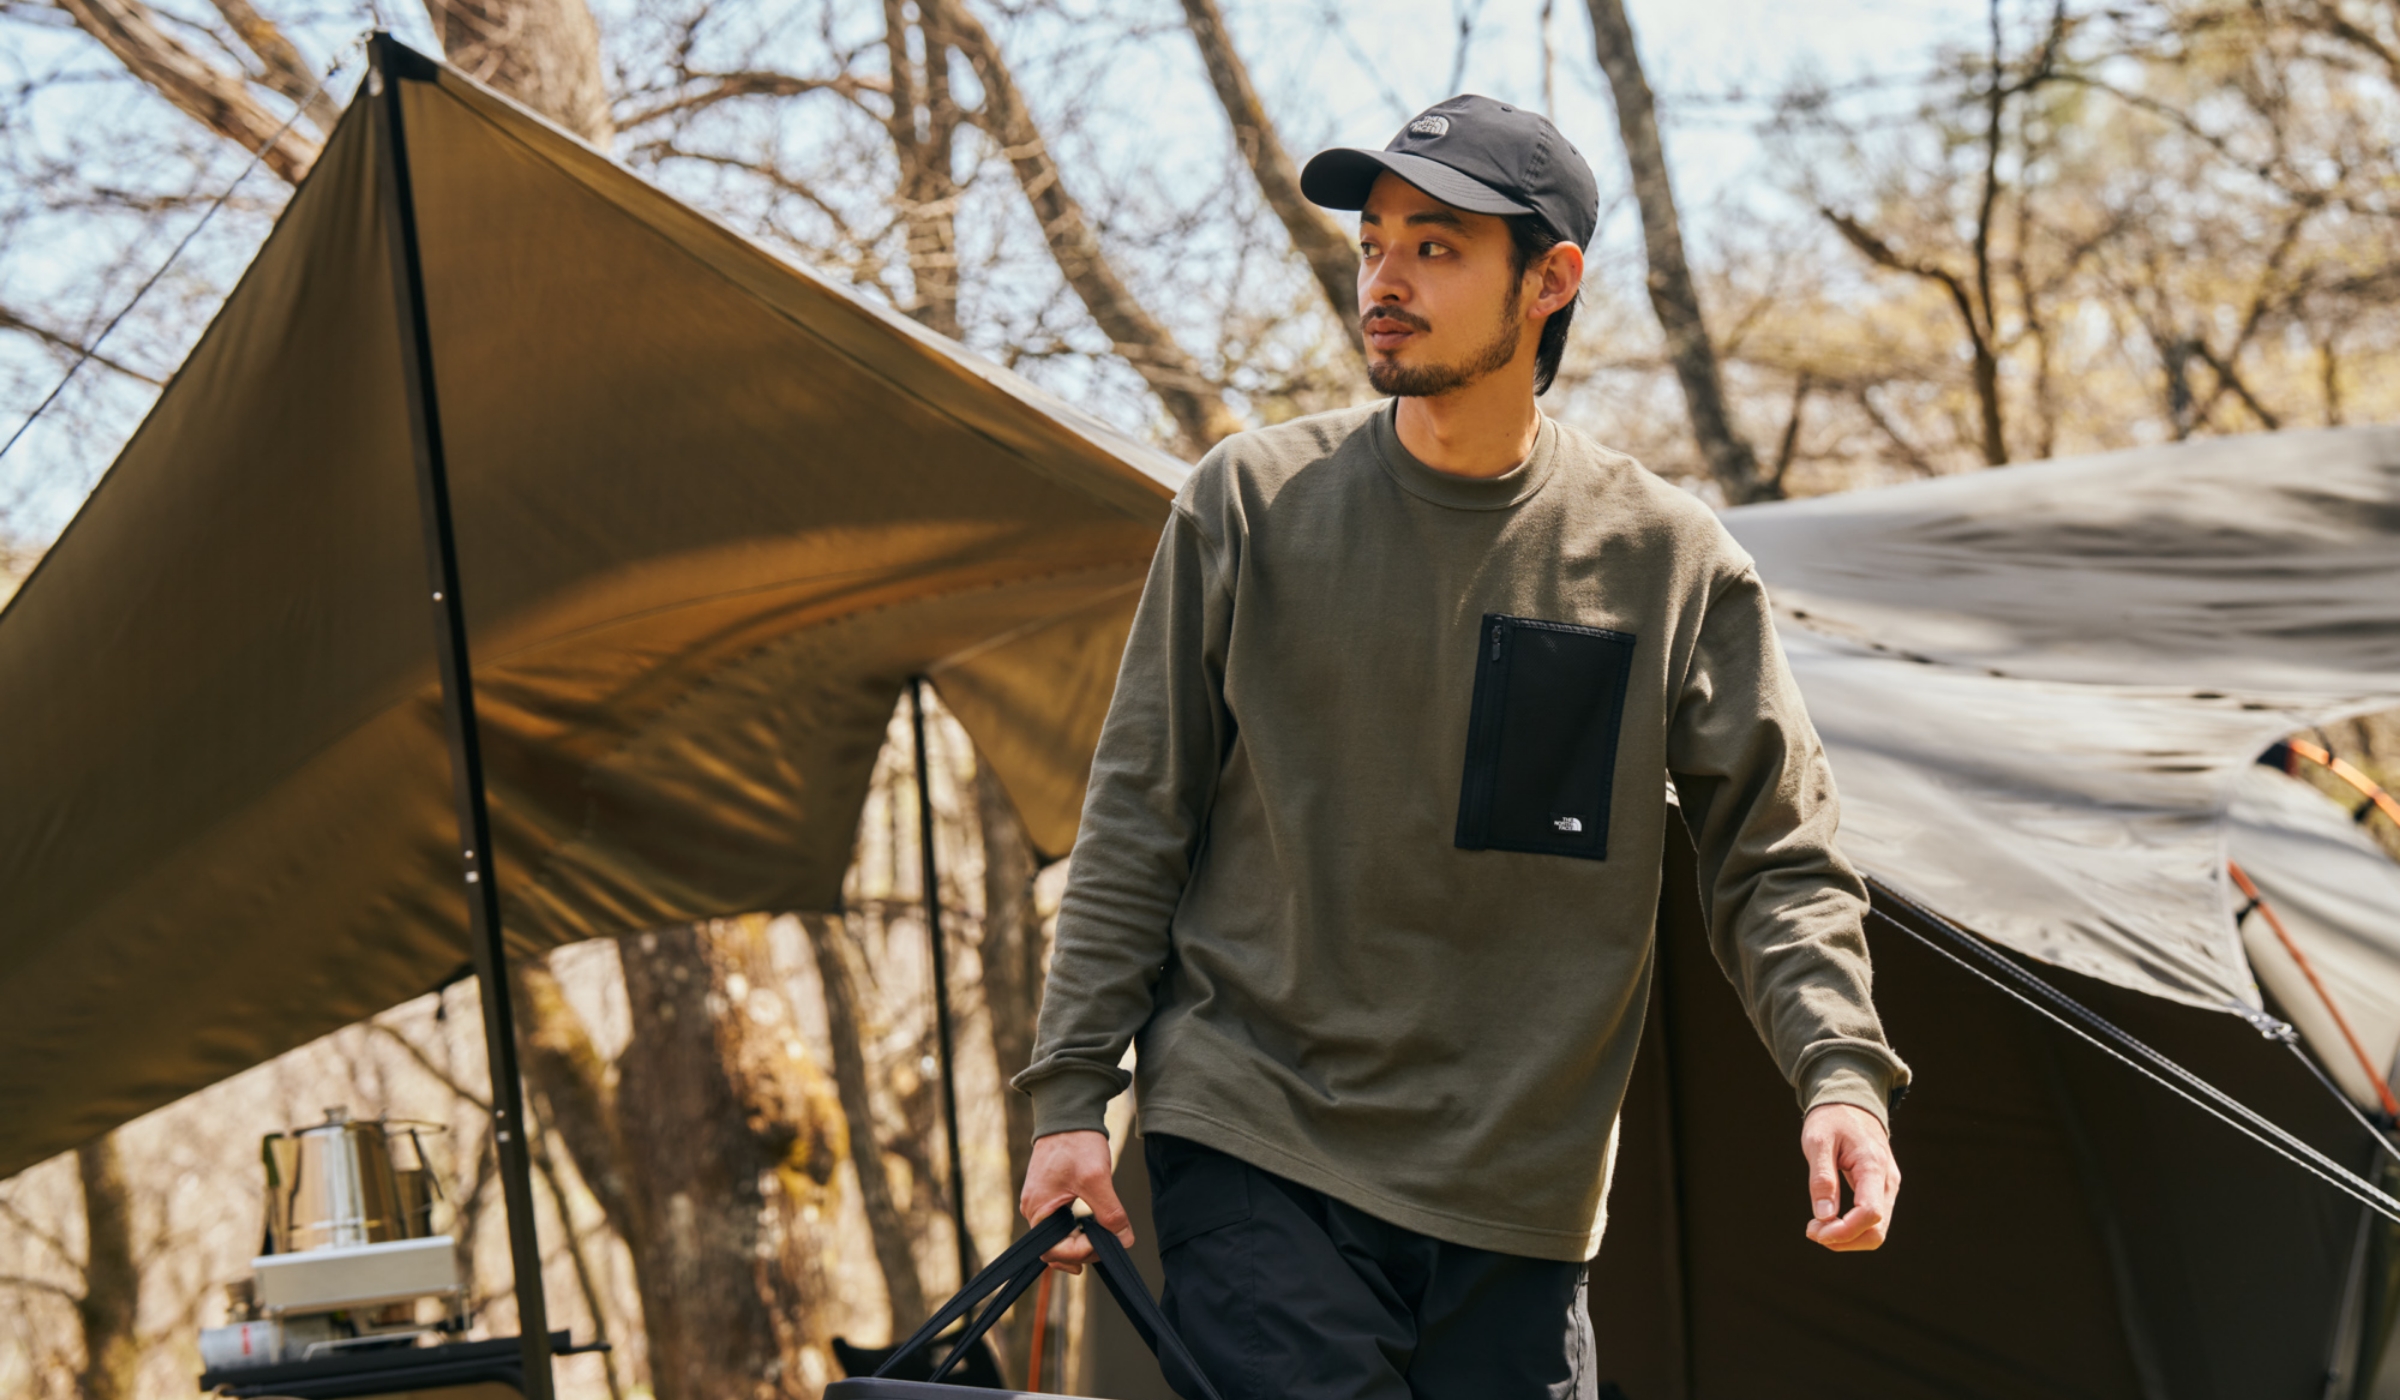 L/S Field Pocket Tee | Online Camp Store | THE NORTH FACE CAMP